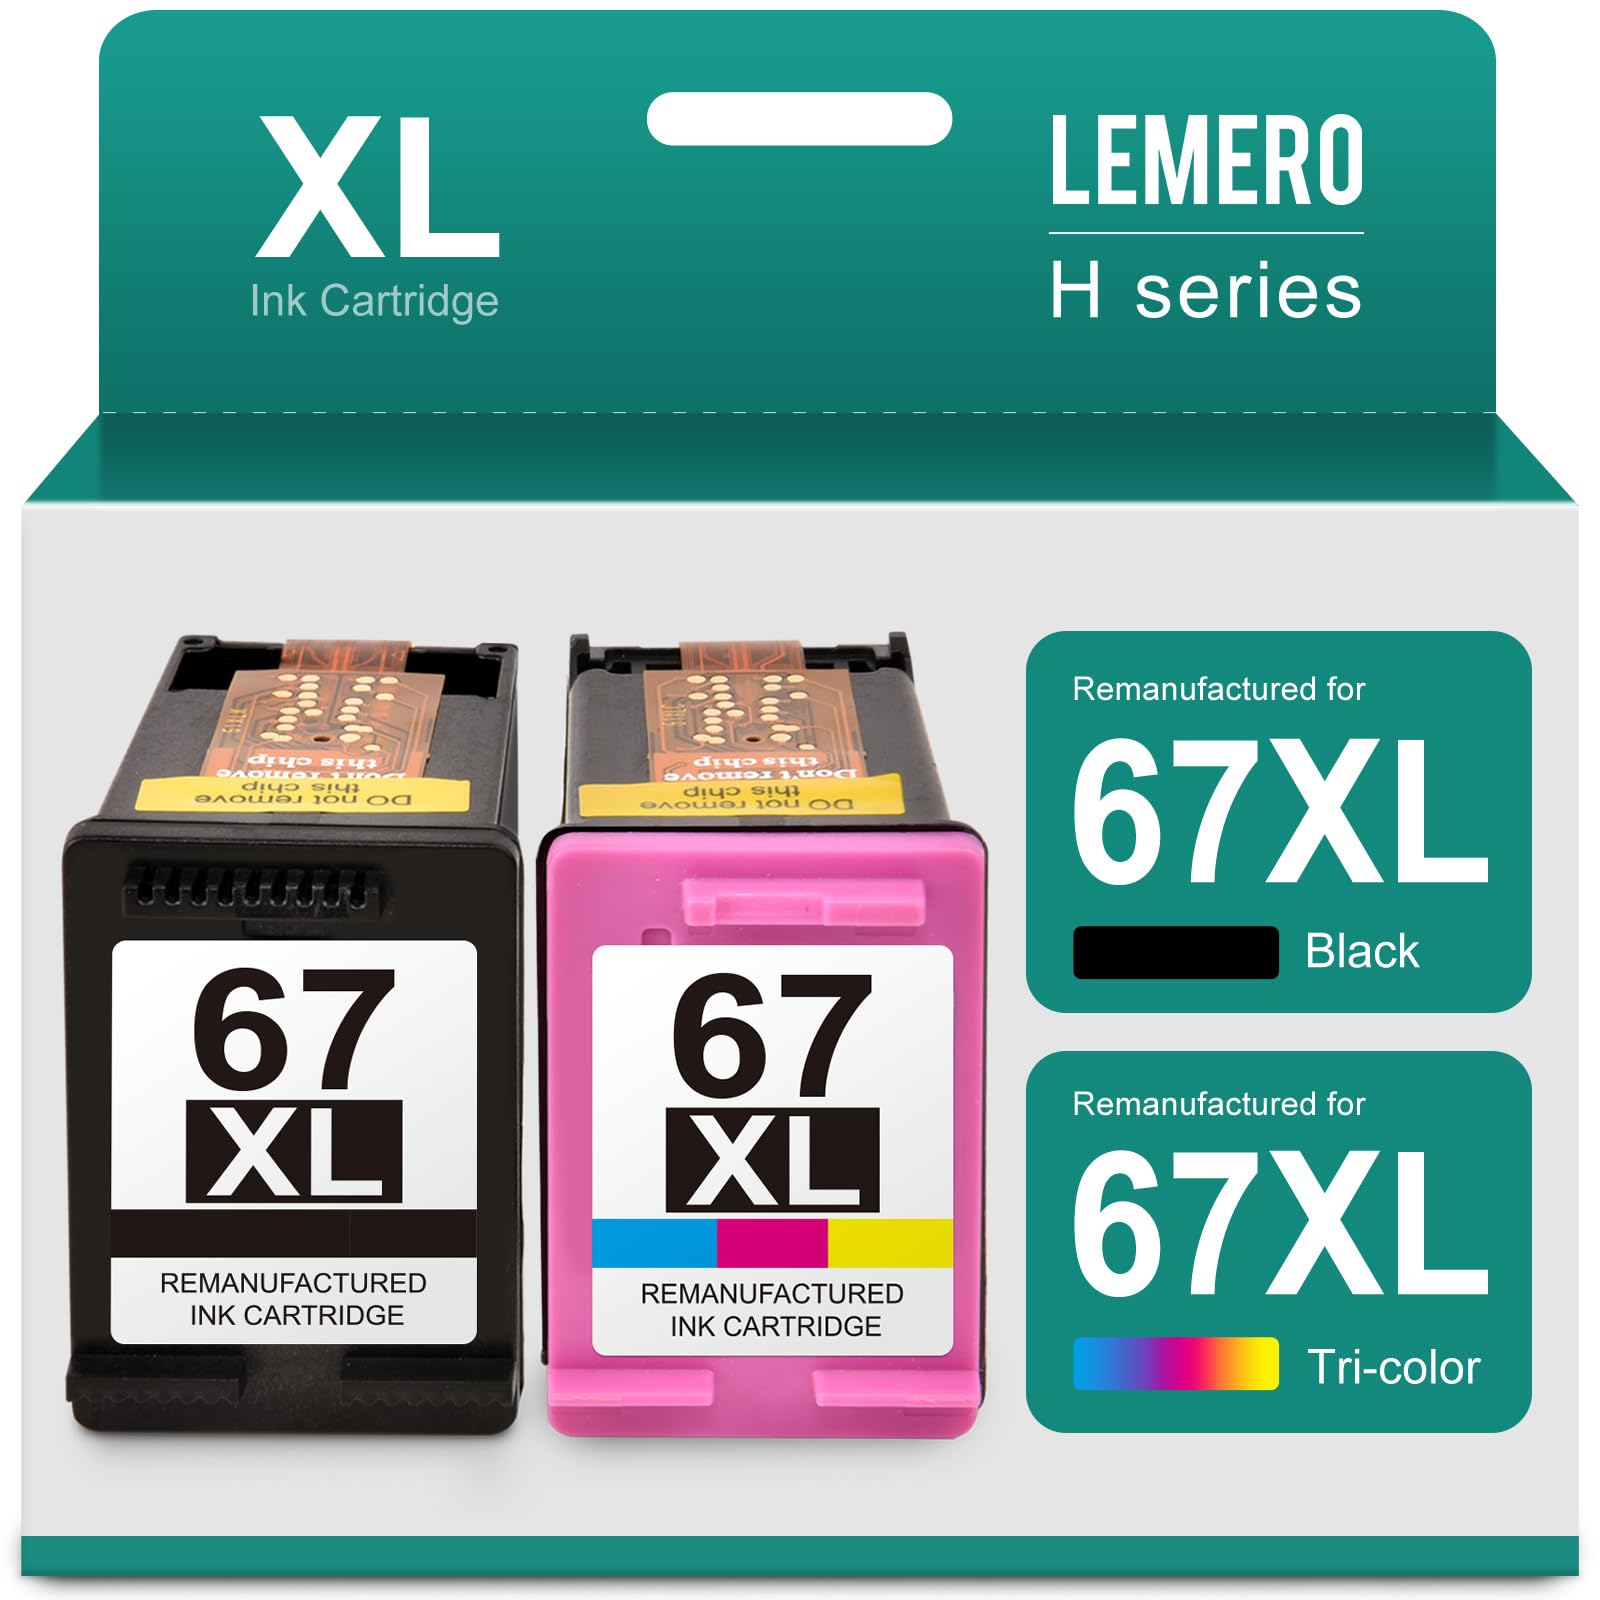 LEMERO H Series 67XL Ink Cartridge Box Image: LEMERO H series remanufactured ink cartridges for 67XL black and tri-color displayed in a green box.